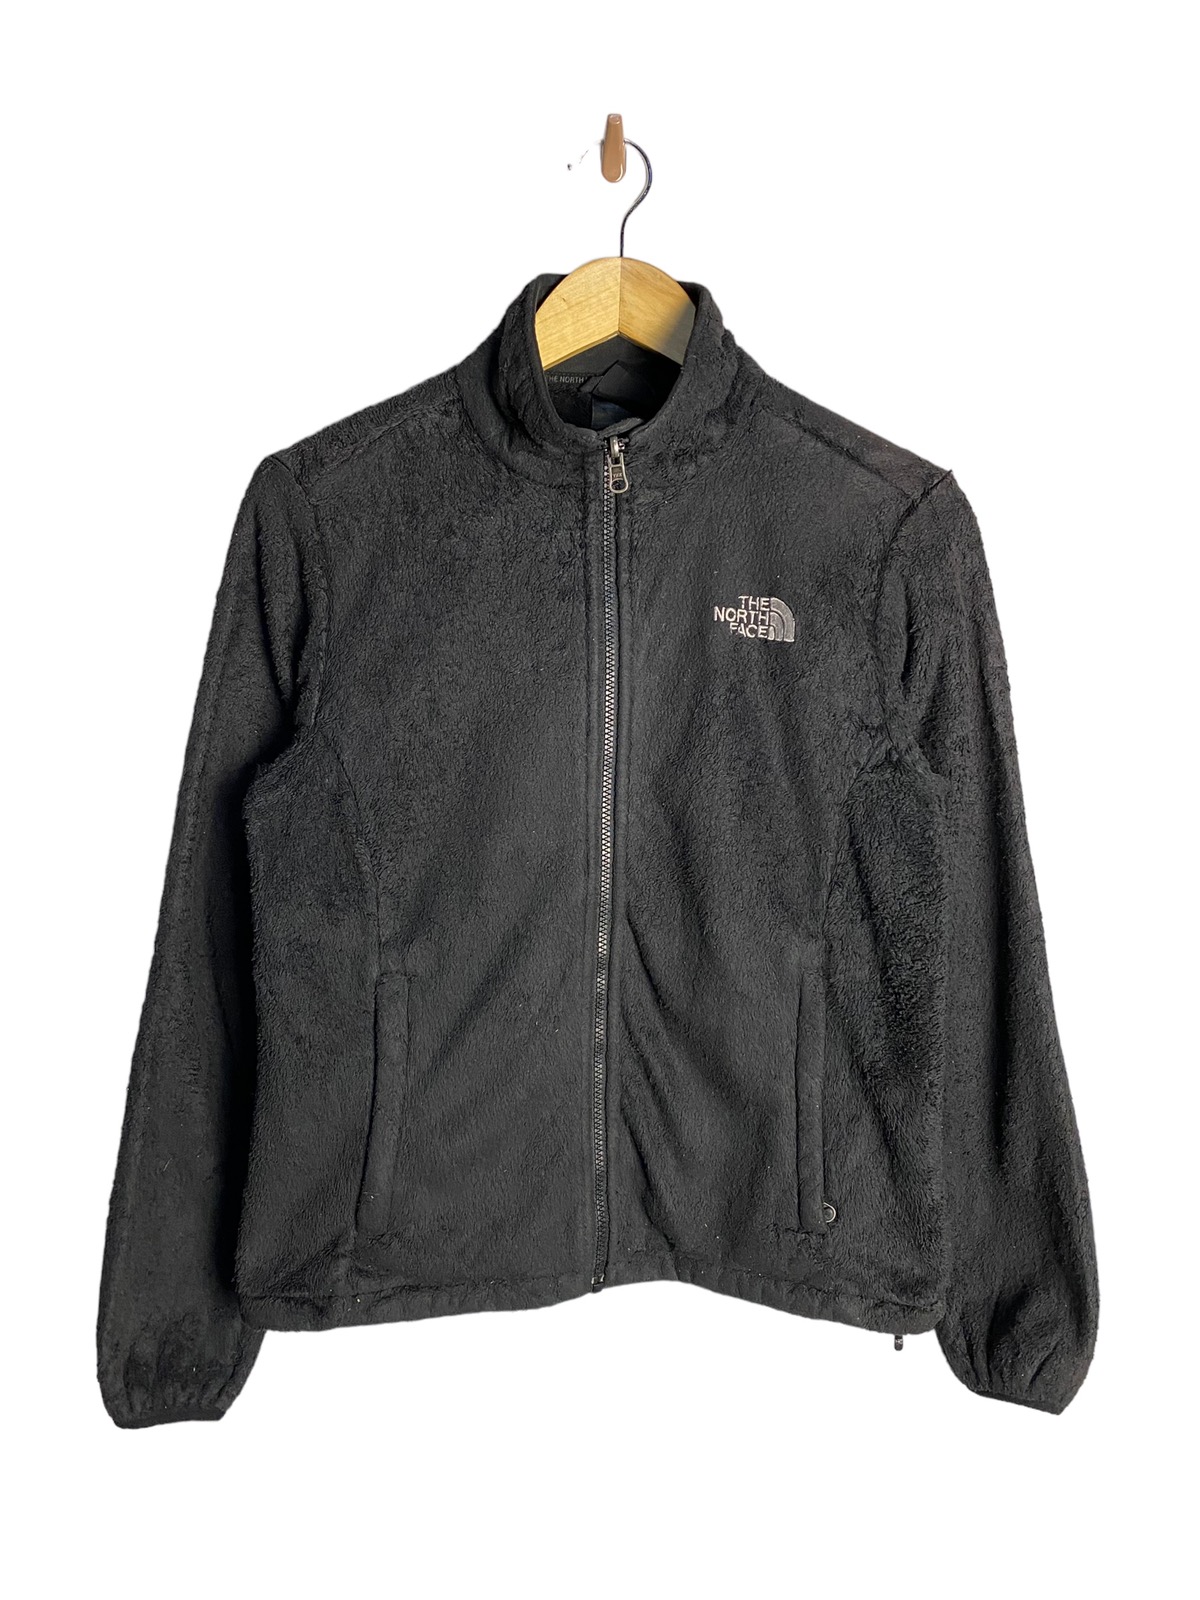 🔥SALE🔥THE NORTH FACE SHERLING FLEECE JACKET - 1